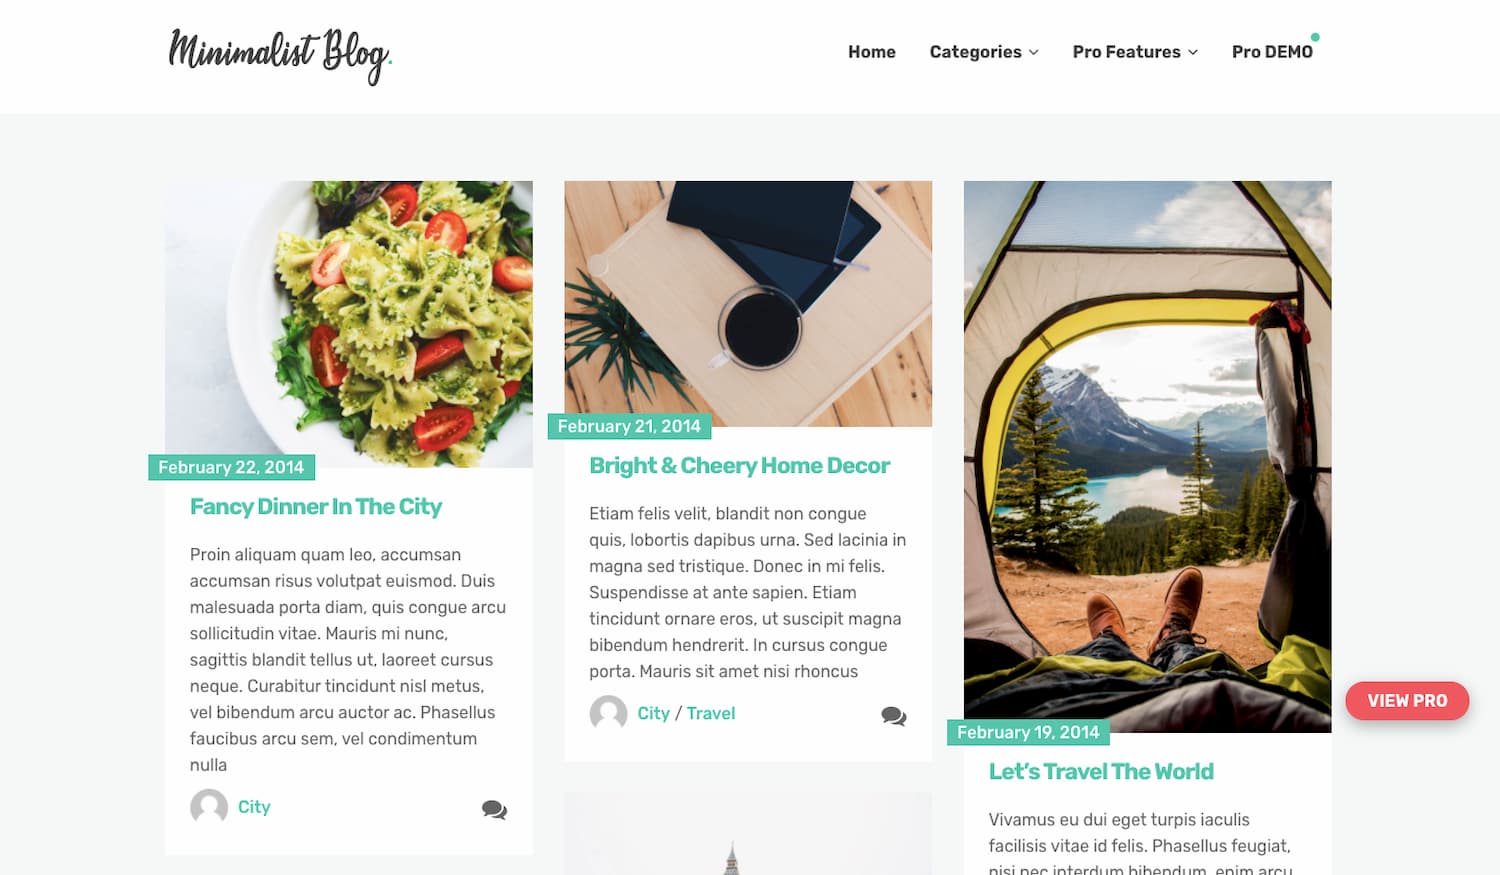 Minimalist Blog is one of the best WordPress themes with grid layout